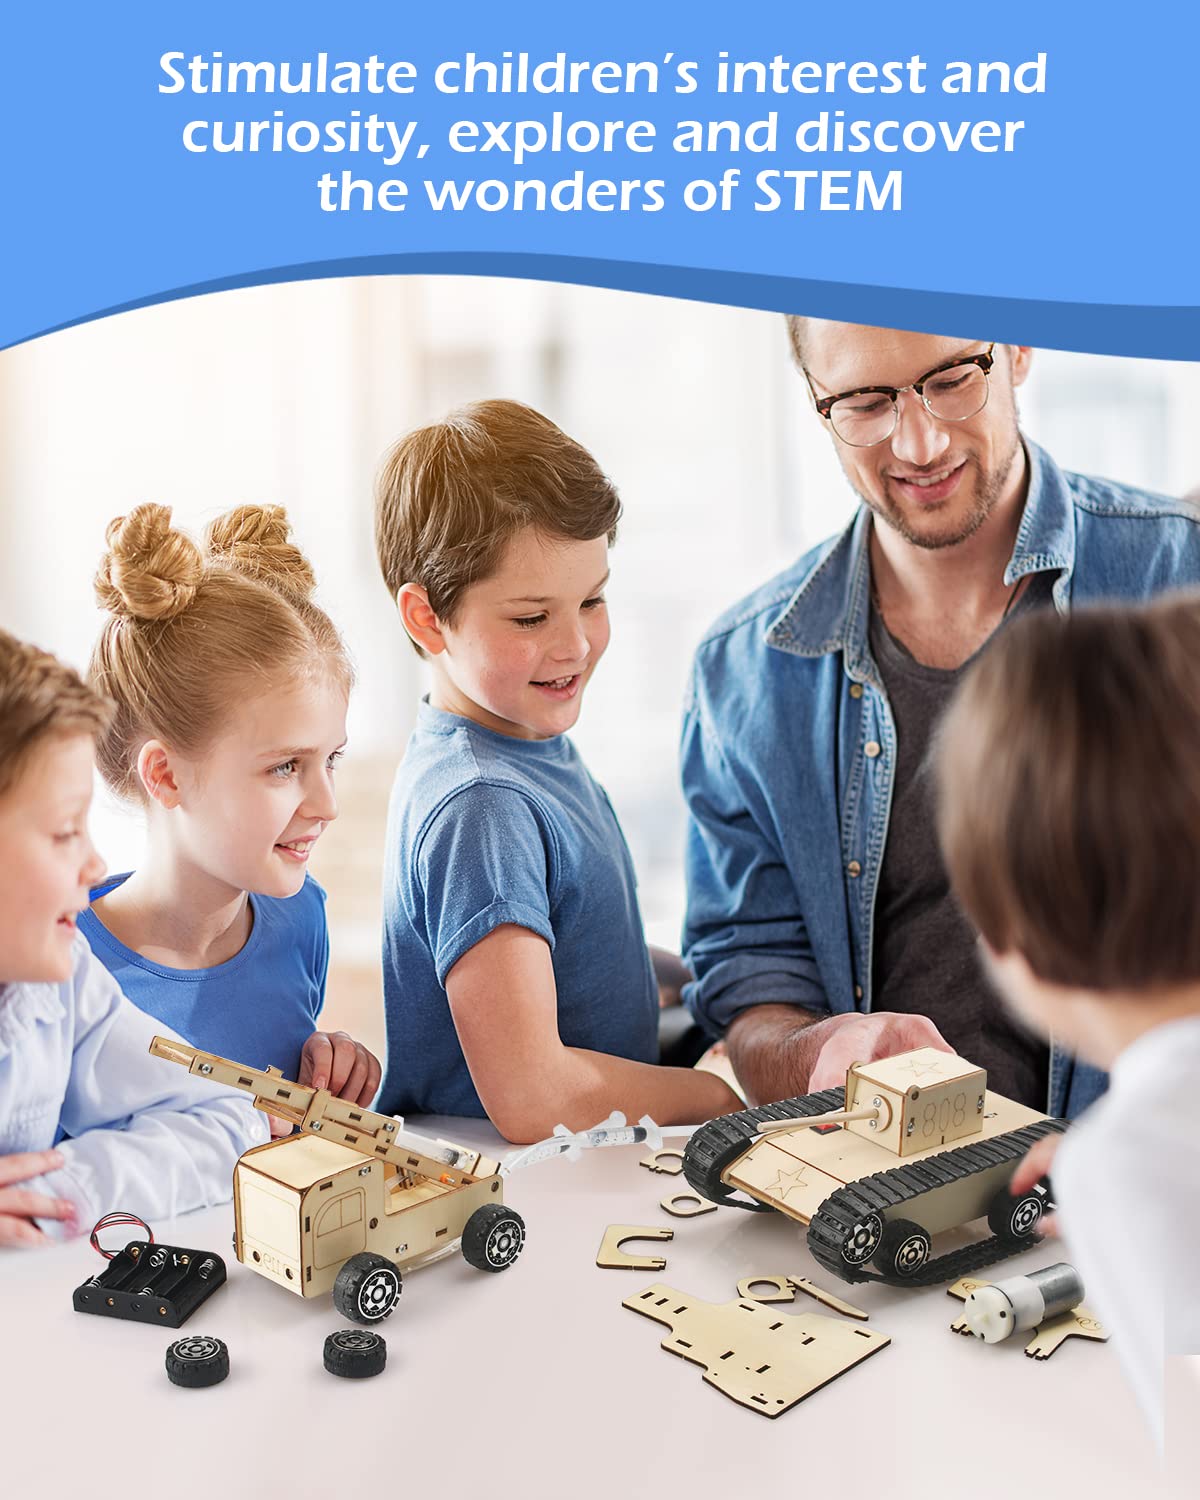 5 Set STEM Projects for Kids Ages 8-12, Model Car Kits, Wooden 3D Puzzles, Educational Science Experiment Kits, Building Toys, Gifts for Boys and